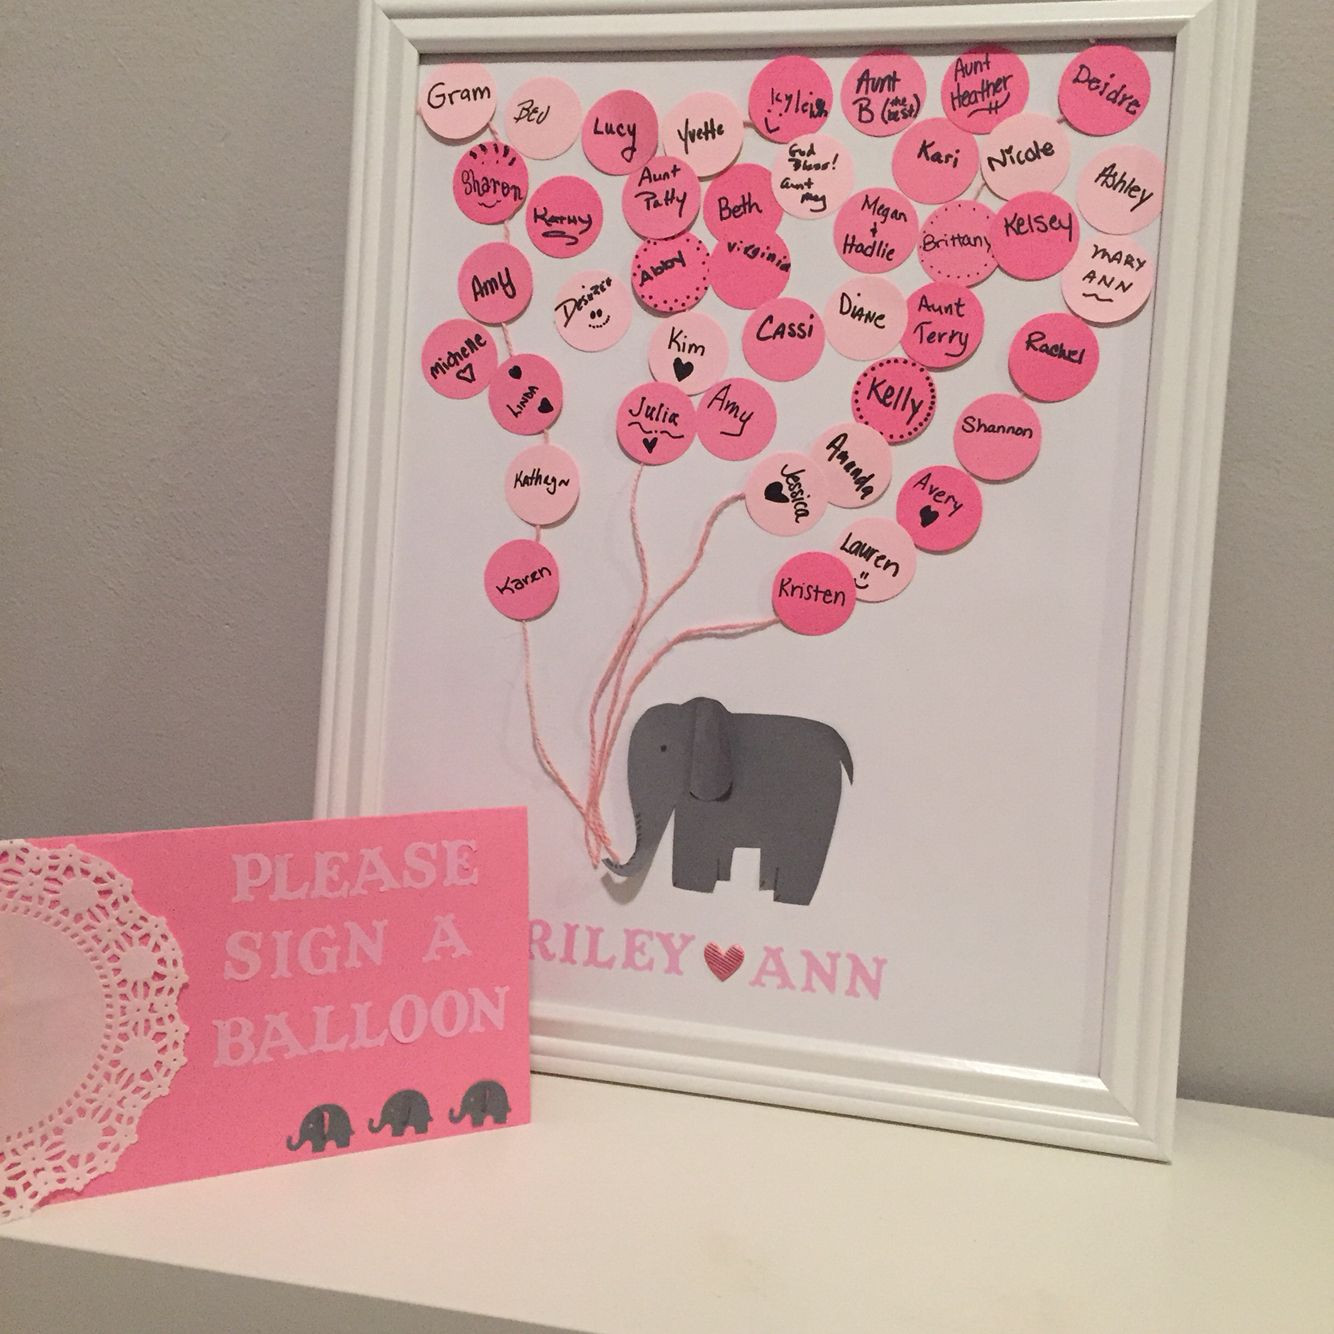 Diy Baby Shower Ideas For Girl
 Diy baby shower guest book Elephant themed for our baby